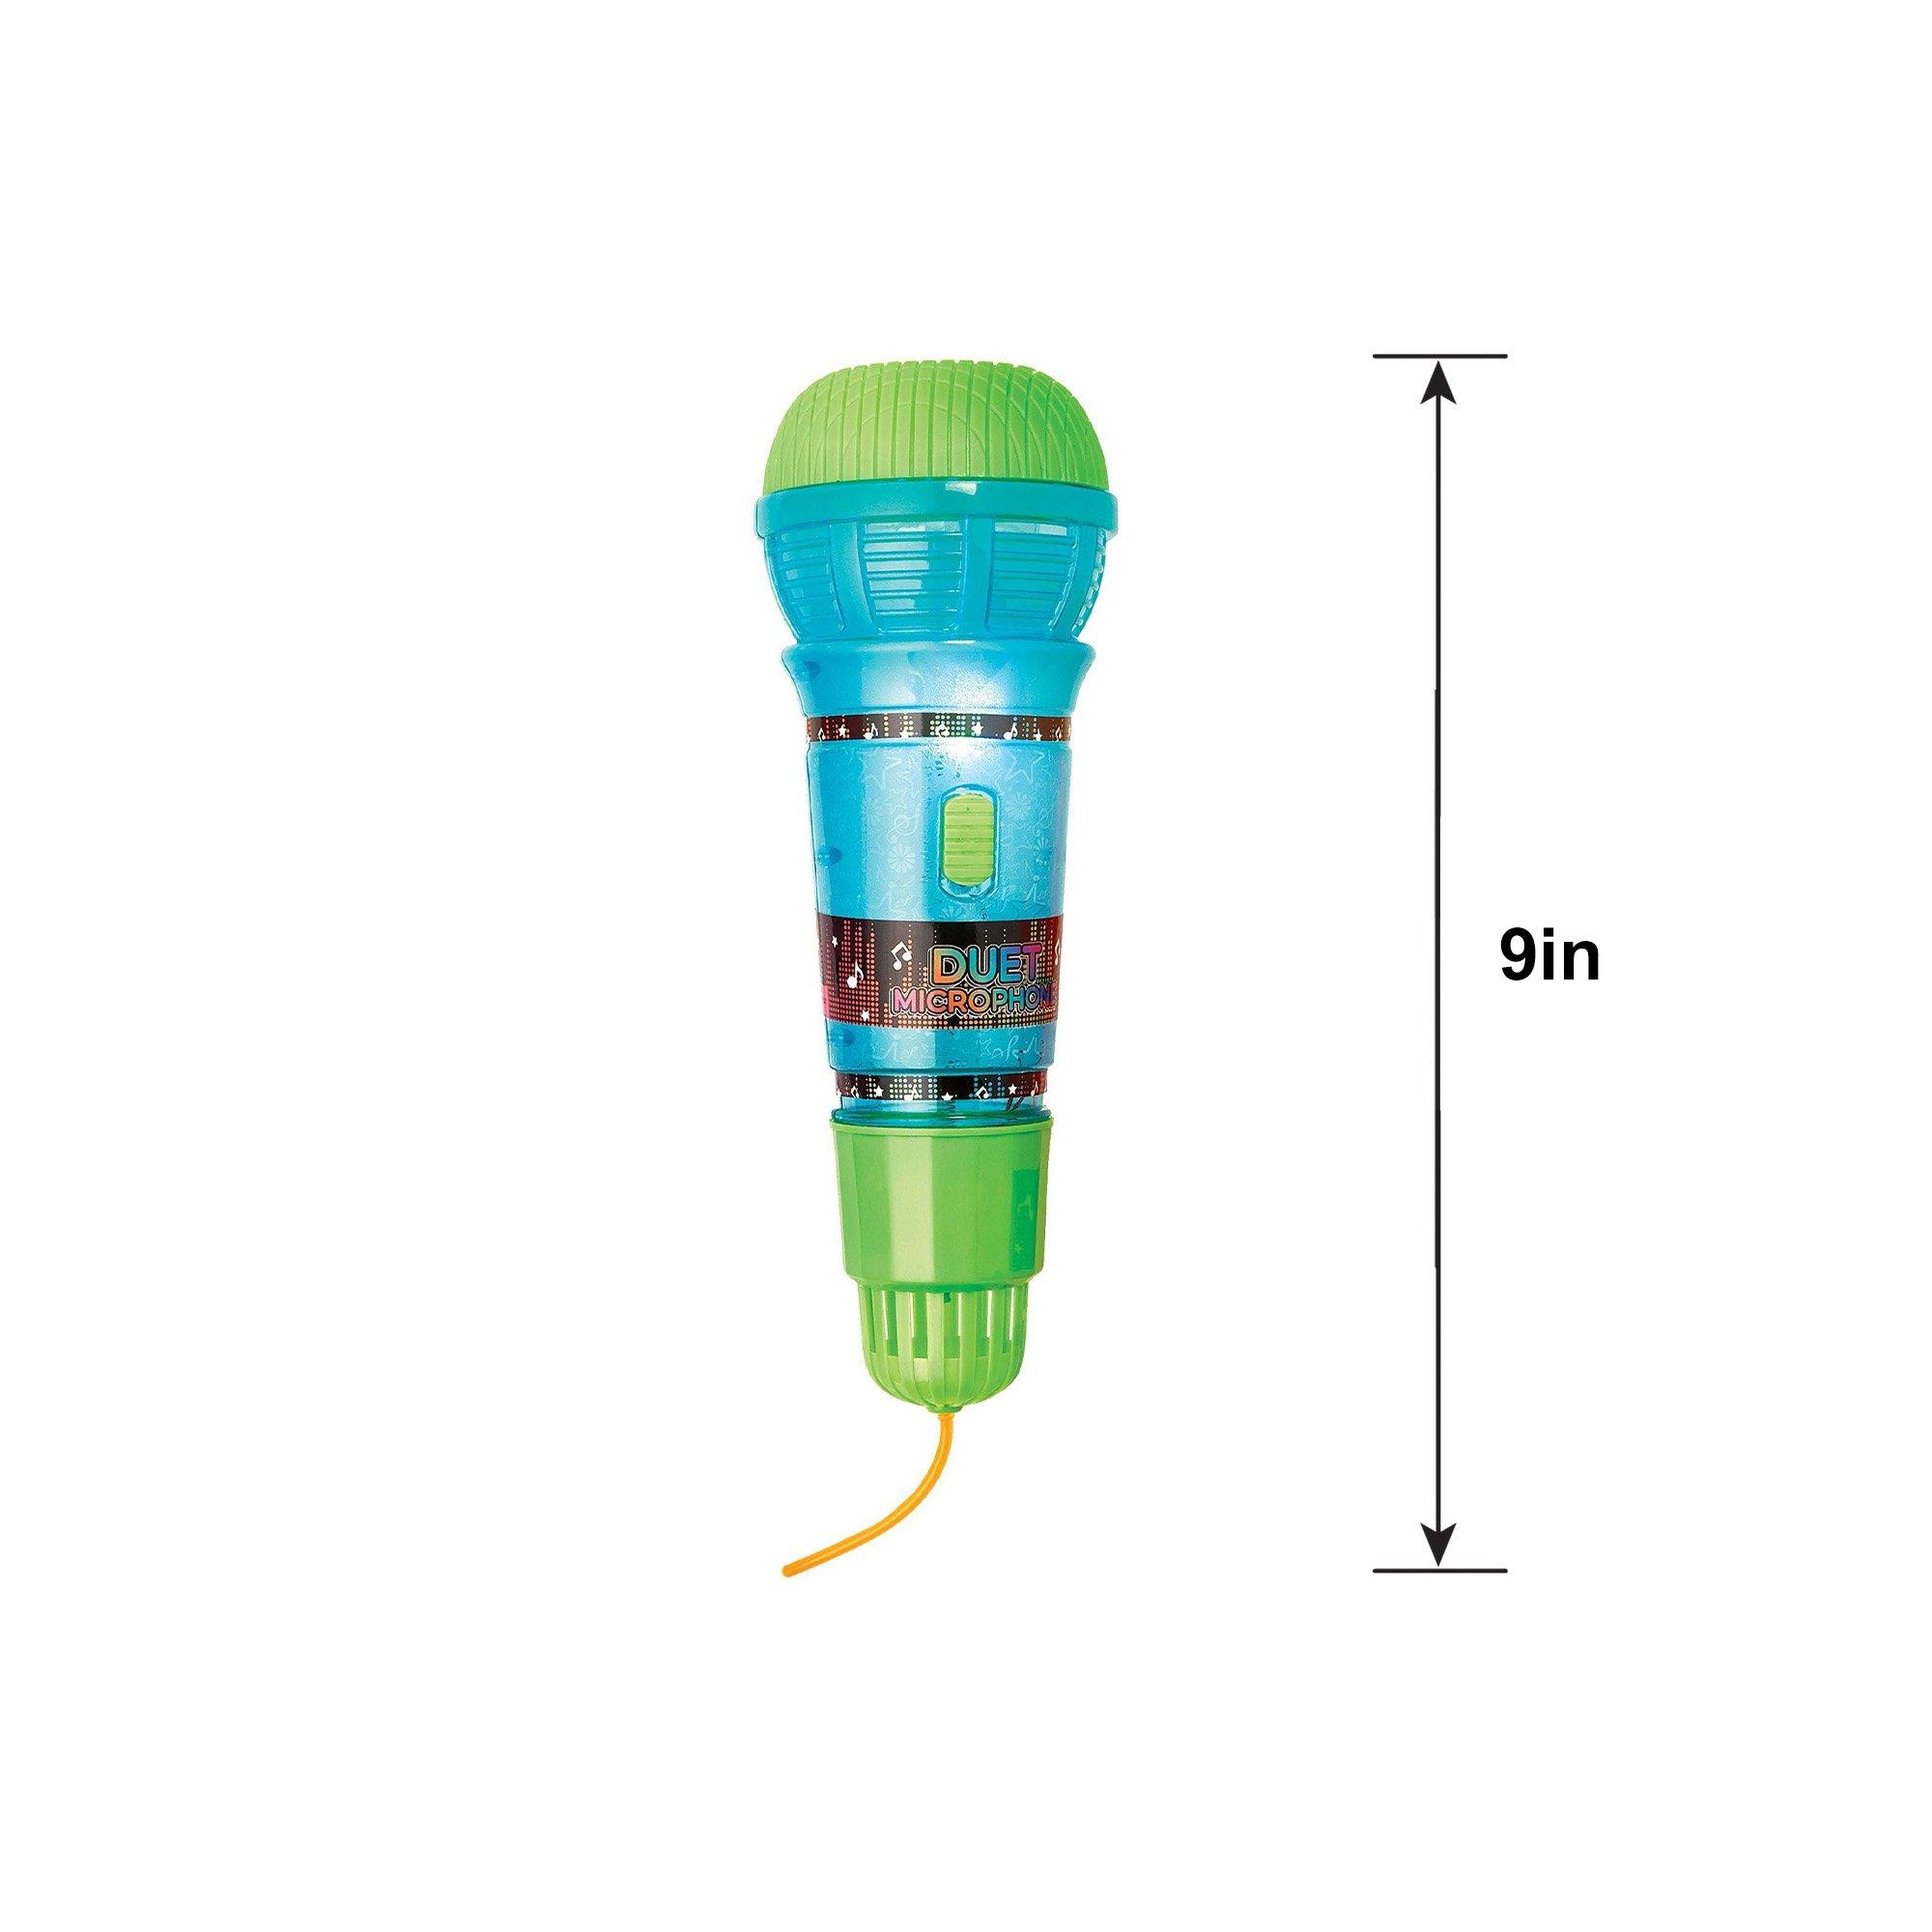 Light-Up Duet Echo Plastic Microphone, 2.9in x 9in - Blue, Orange or Pink